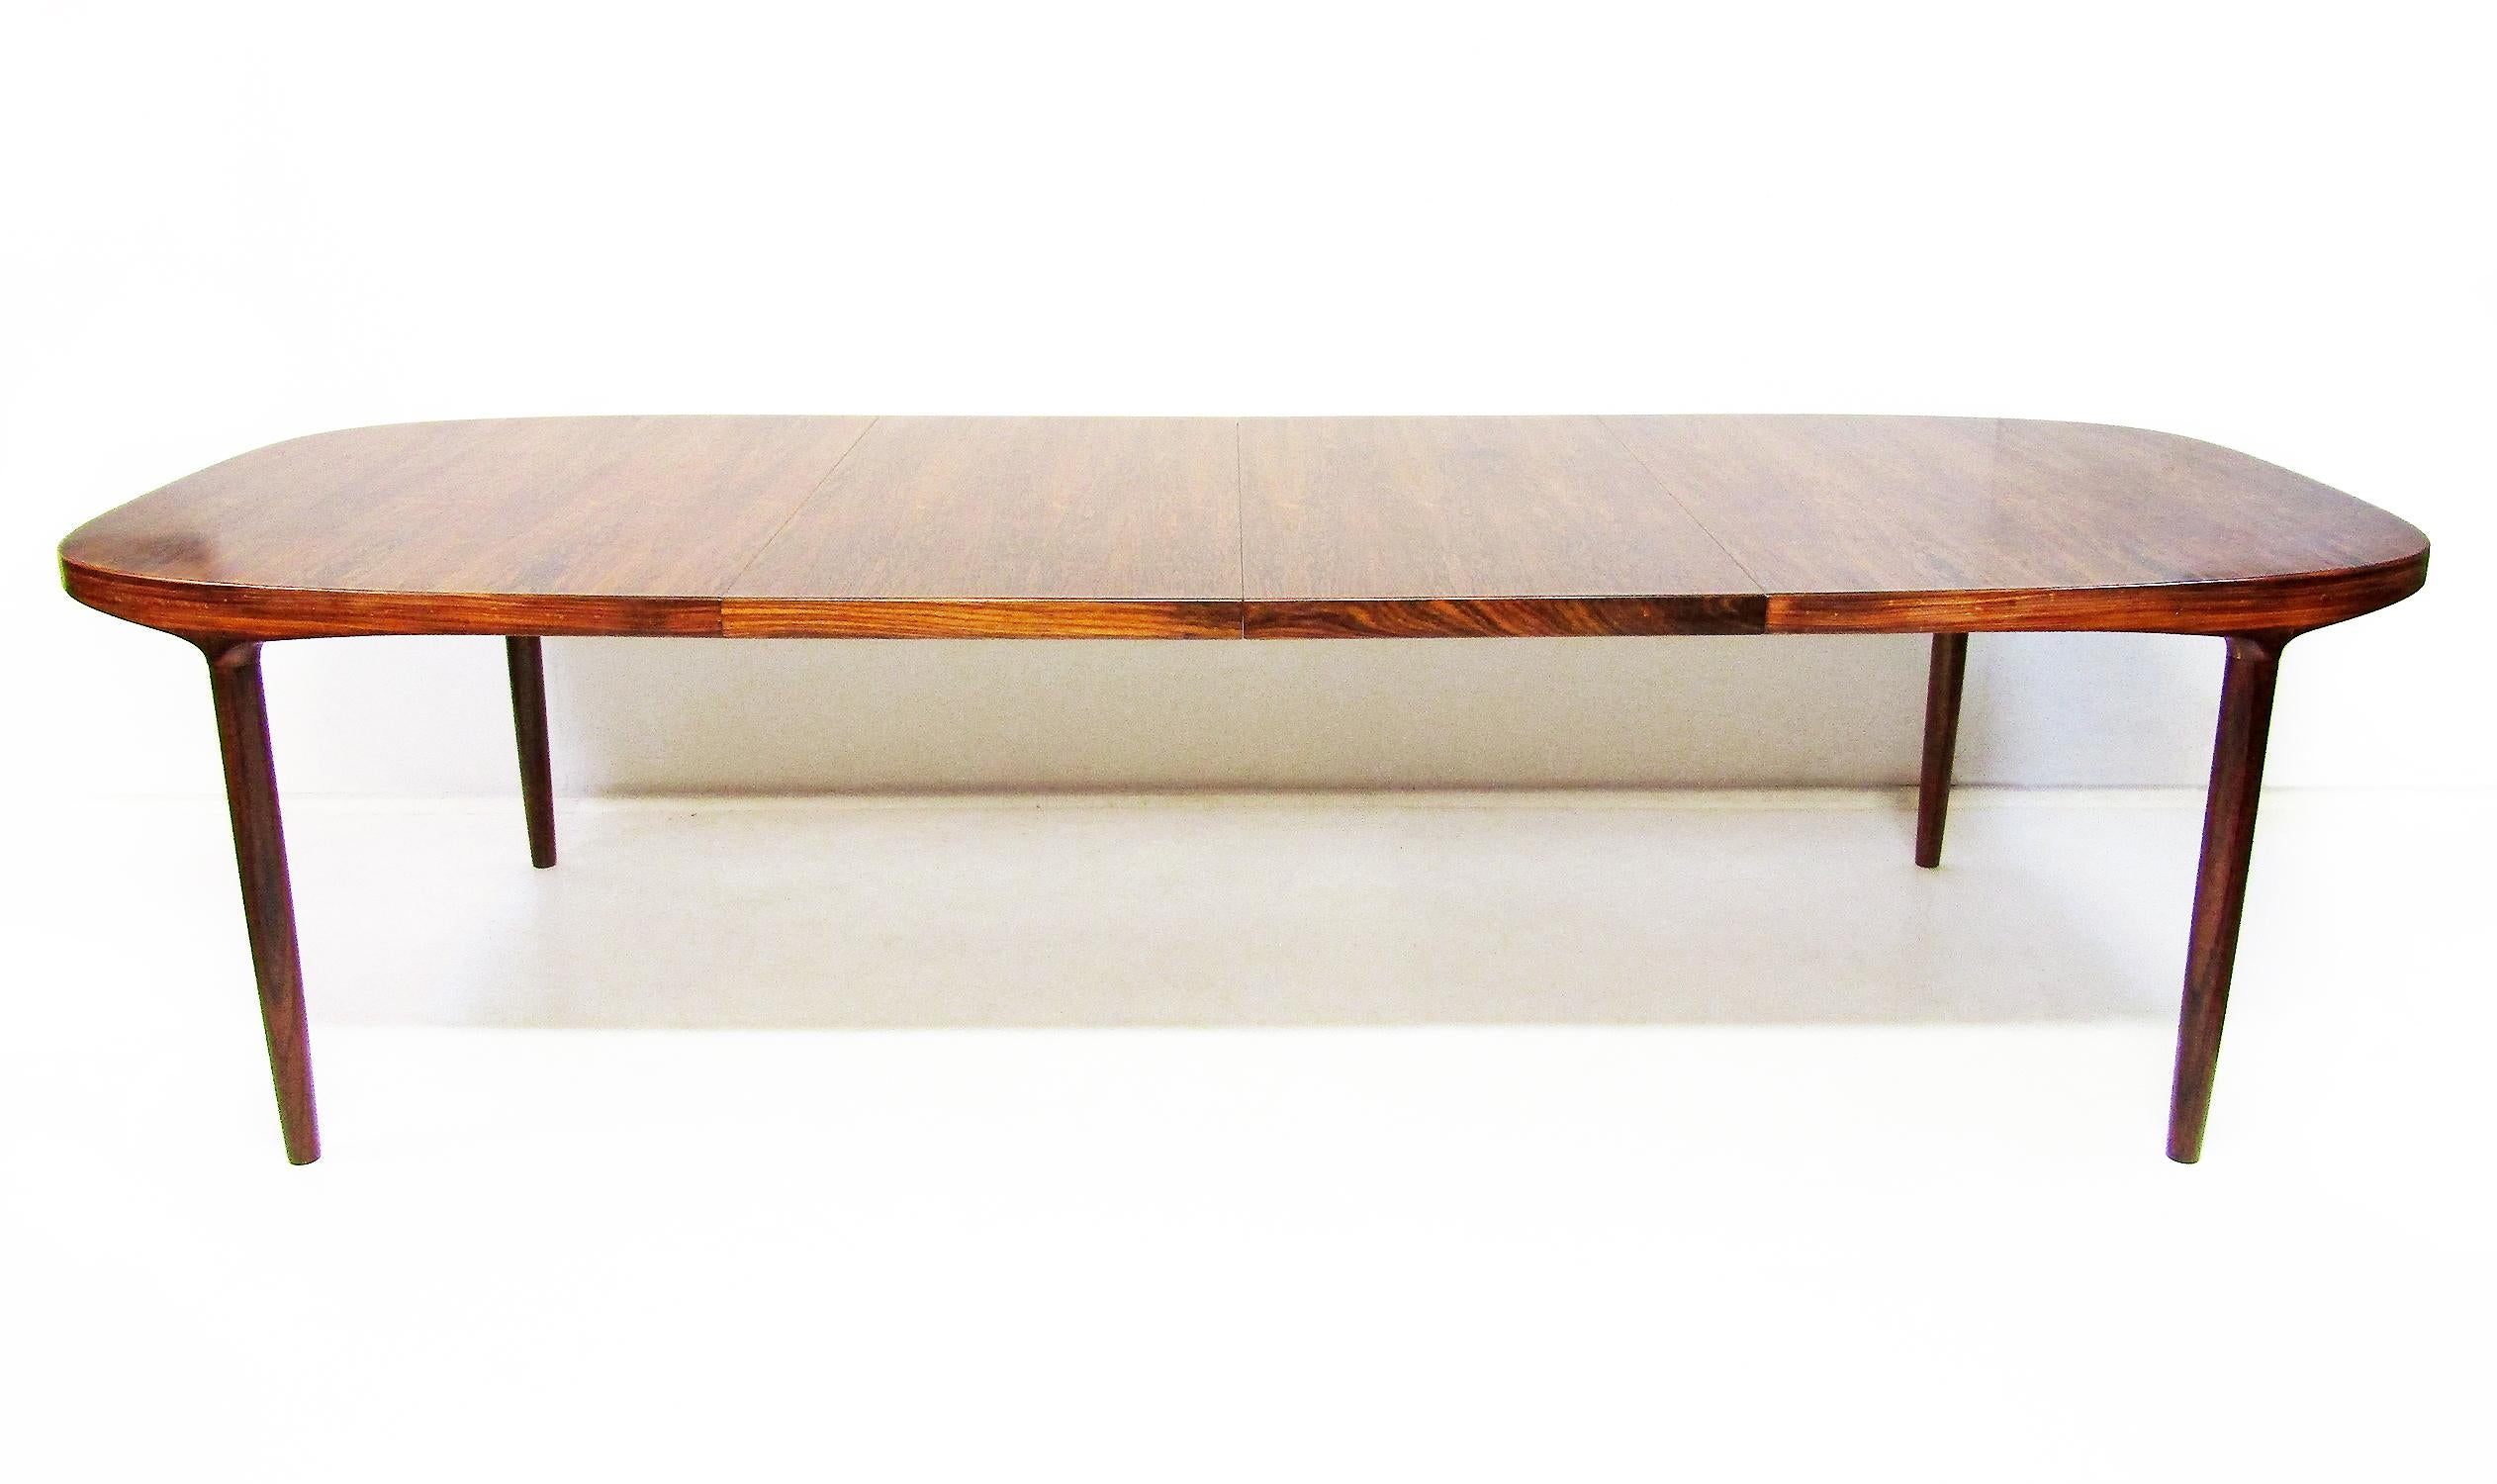 A perfectly proportioned dining or conference table in Rio Rosewood by Danish designer Harry Ostergaard for Randers Mobelfabrik, circa 1960.

Extending up to 280cm, this table has two leaves, which integrate seamlessly with the containing surface.